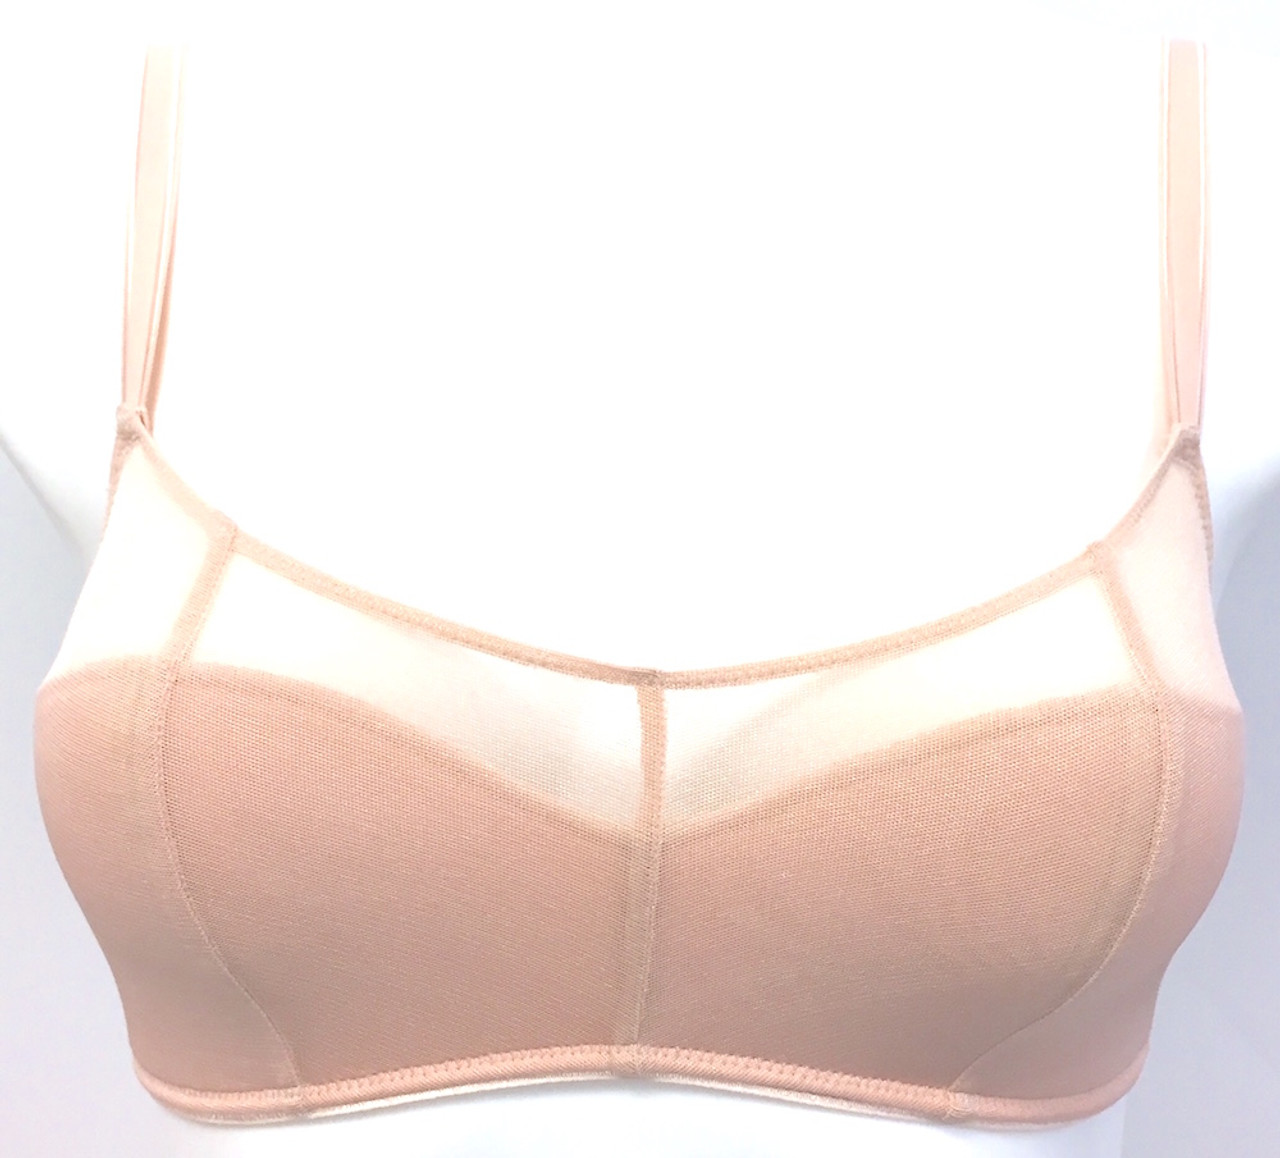 https://cdn11.bigcommerce.com/s-w5zmvrybvt/images/stencil/1280x1280/products/452/3220/jet_set_bandeau_bralette_in_nude__36582.1558536785.jpg?c=2